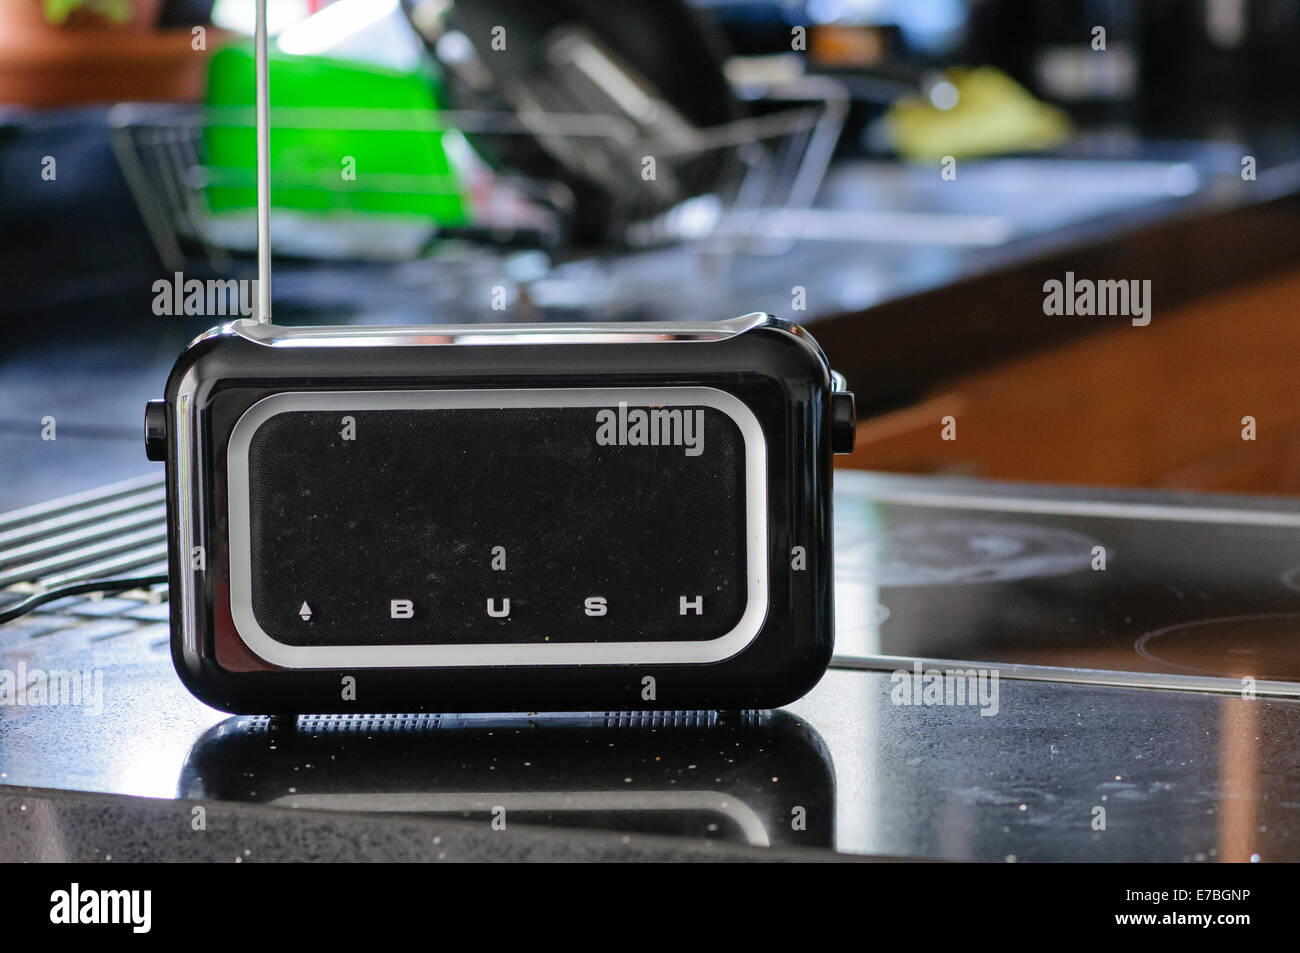 A Bush DAB radio on the worktop in a kitchen. Stock Photo